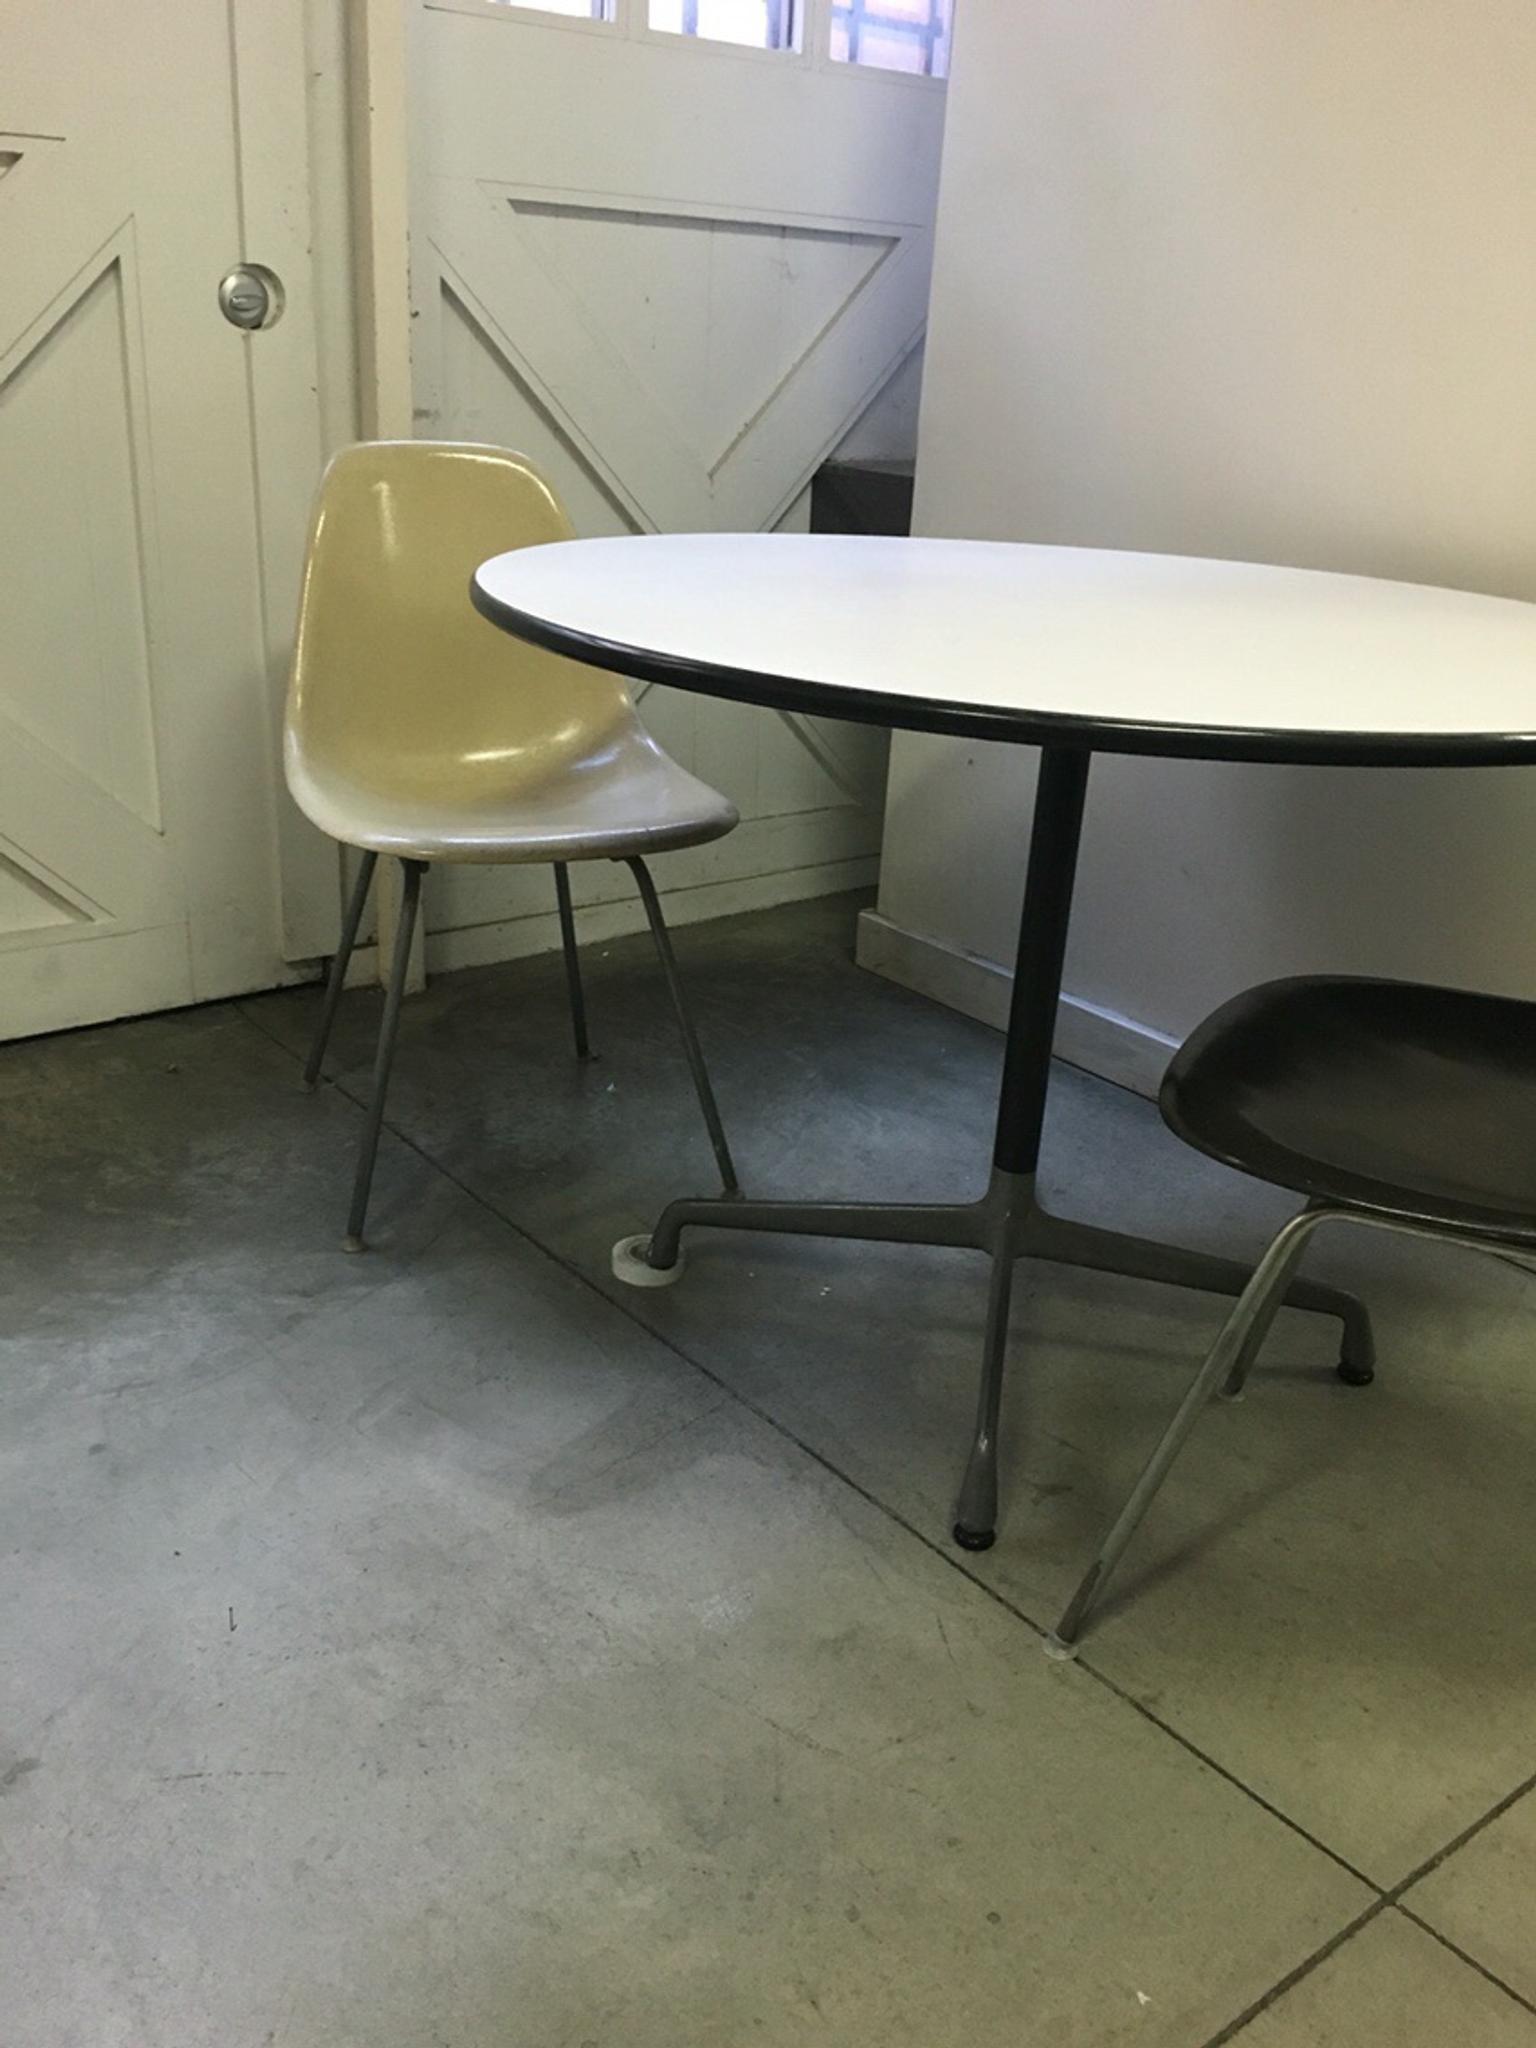 Herman Miller Table And Or Chairs In 91030 South Pasadena Fur